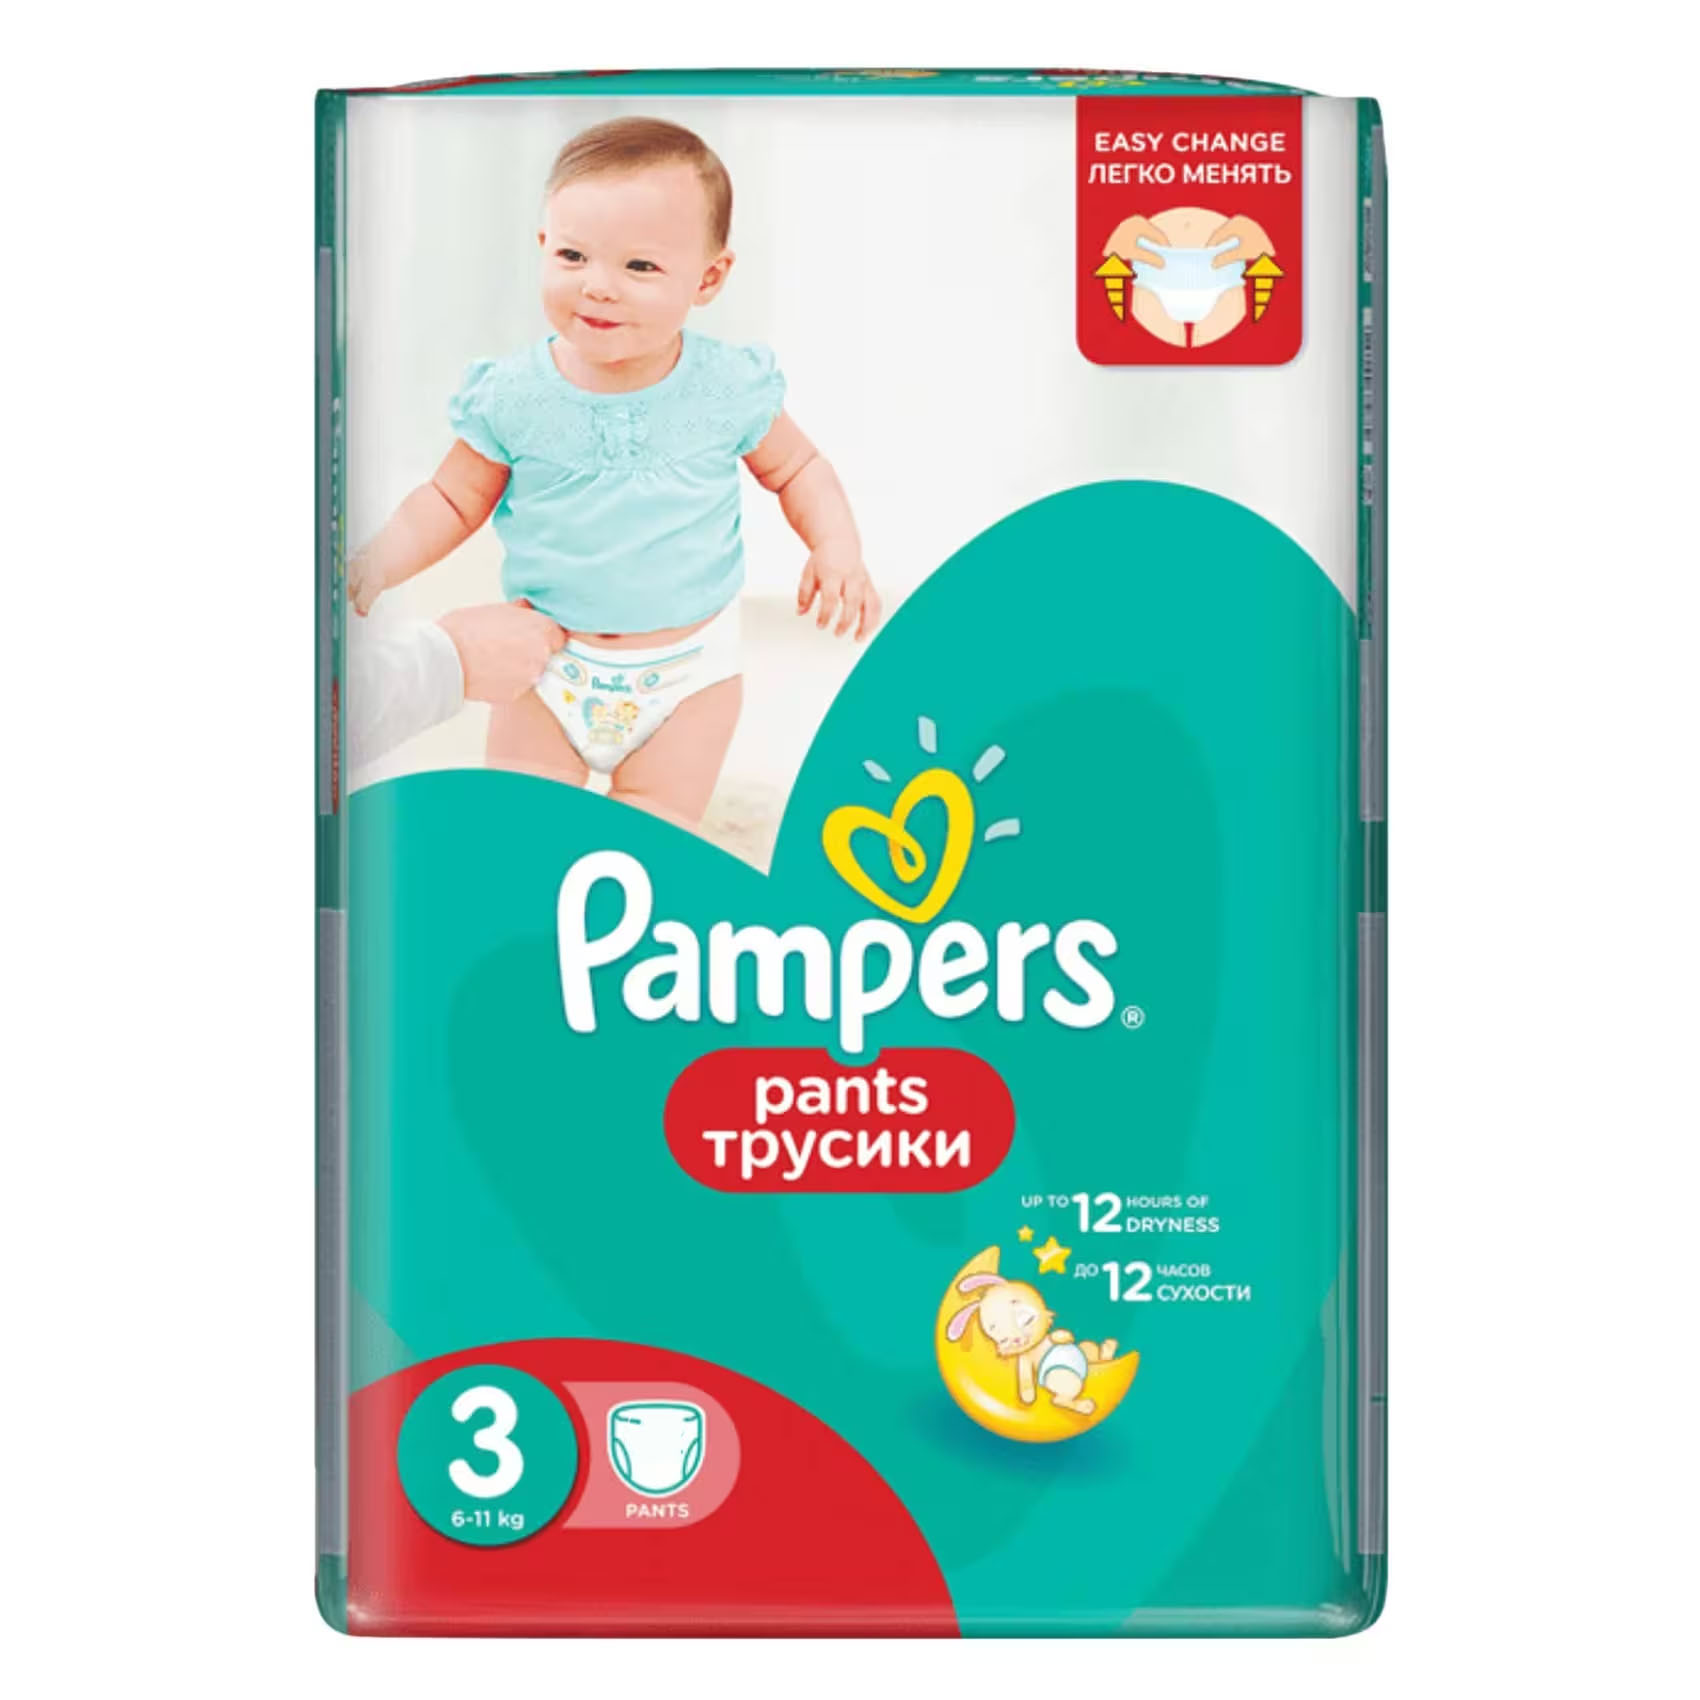 Pampers Baby Pants Diaper Medium Size 3, 58 Count 6-11 kg.